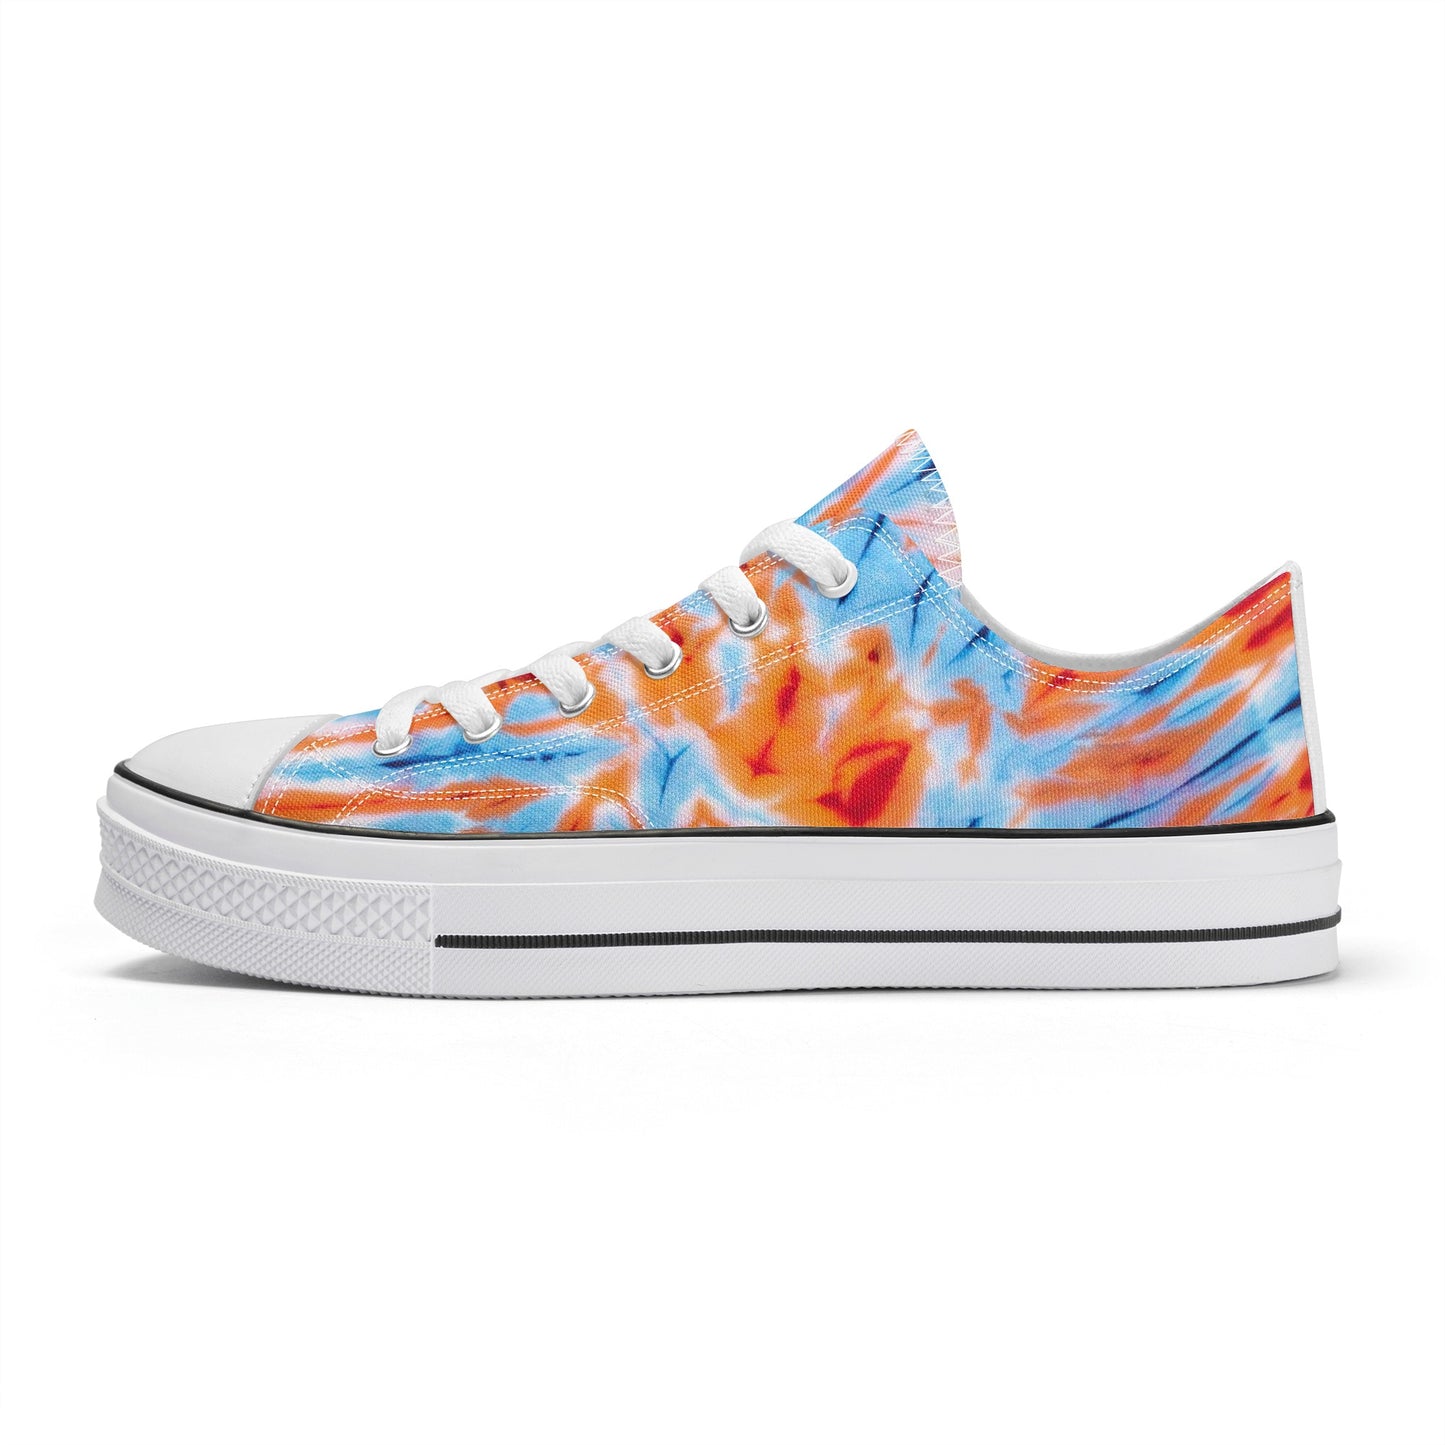 Orange and Blue Tie Dye Pattern - Mens Classic Low Top Canvas Shoes for Footwear Lovers